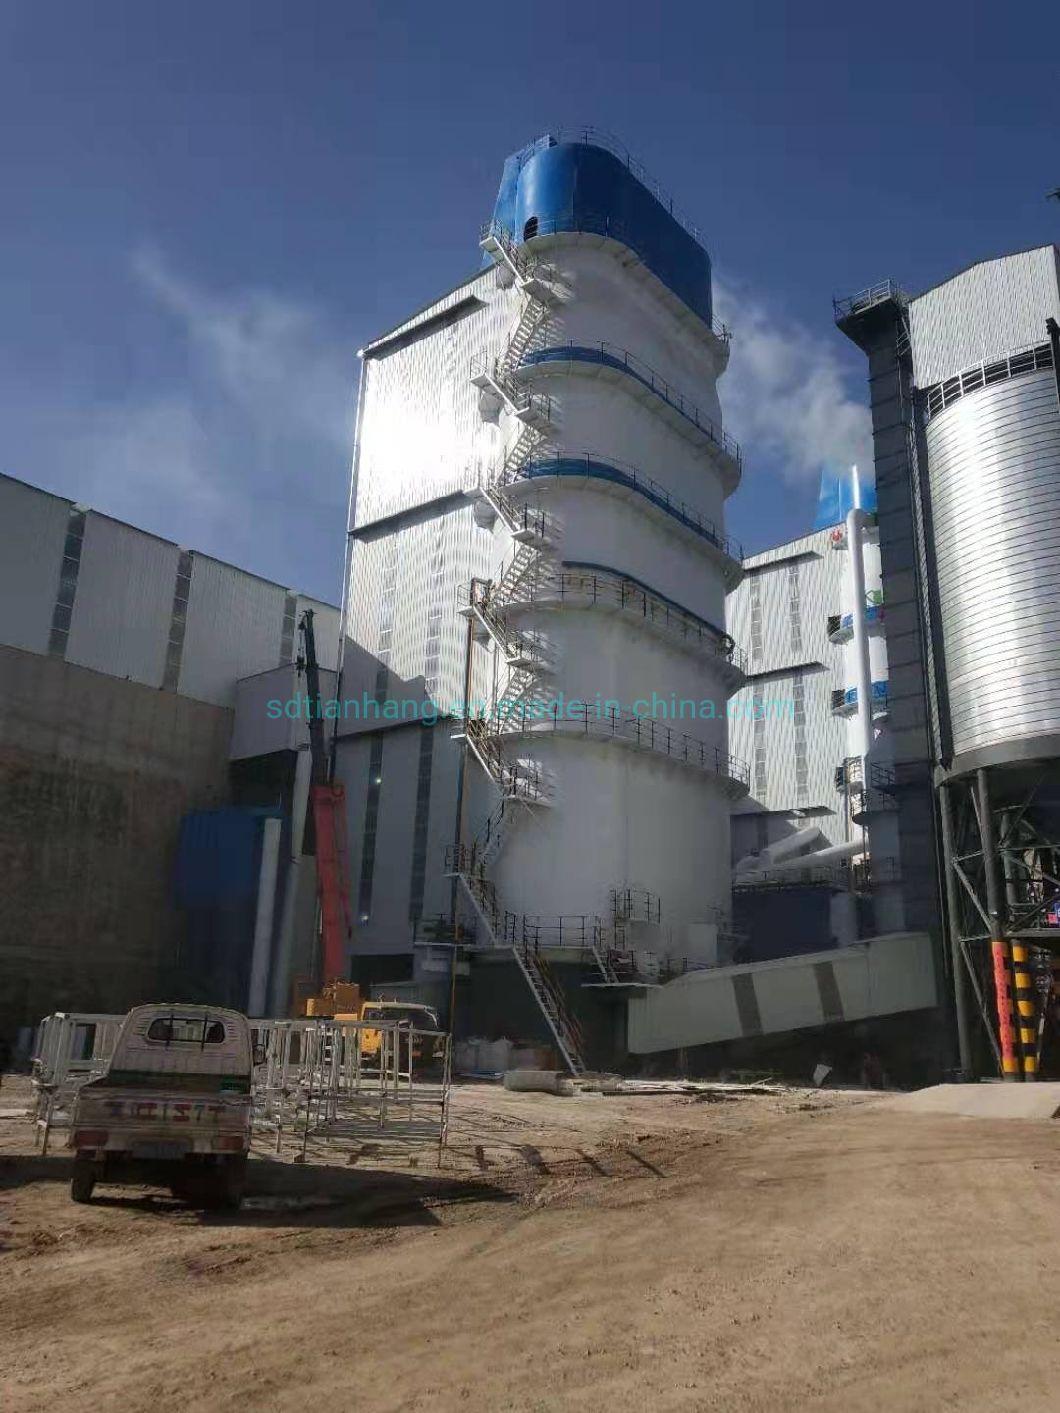 Lime Cement Metallurgical Chemical Industr Active Lime Industries Shaft/Vertical Kiln